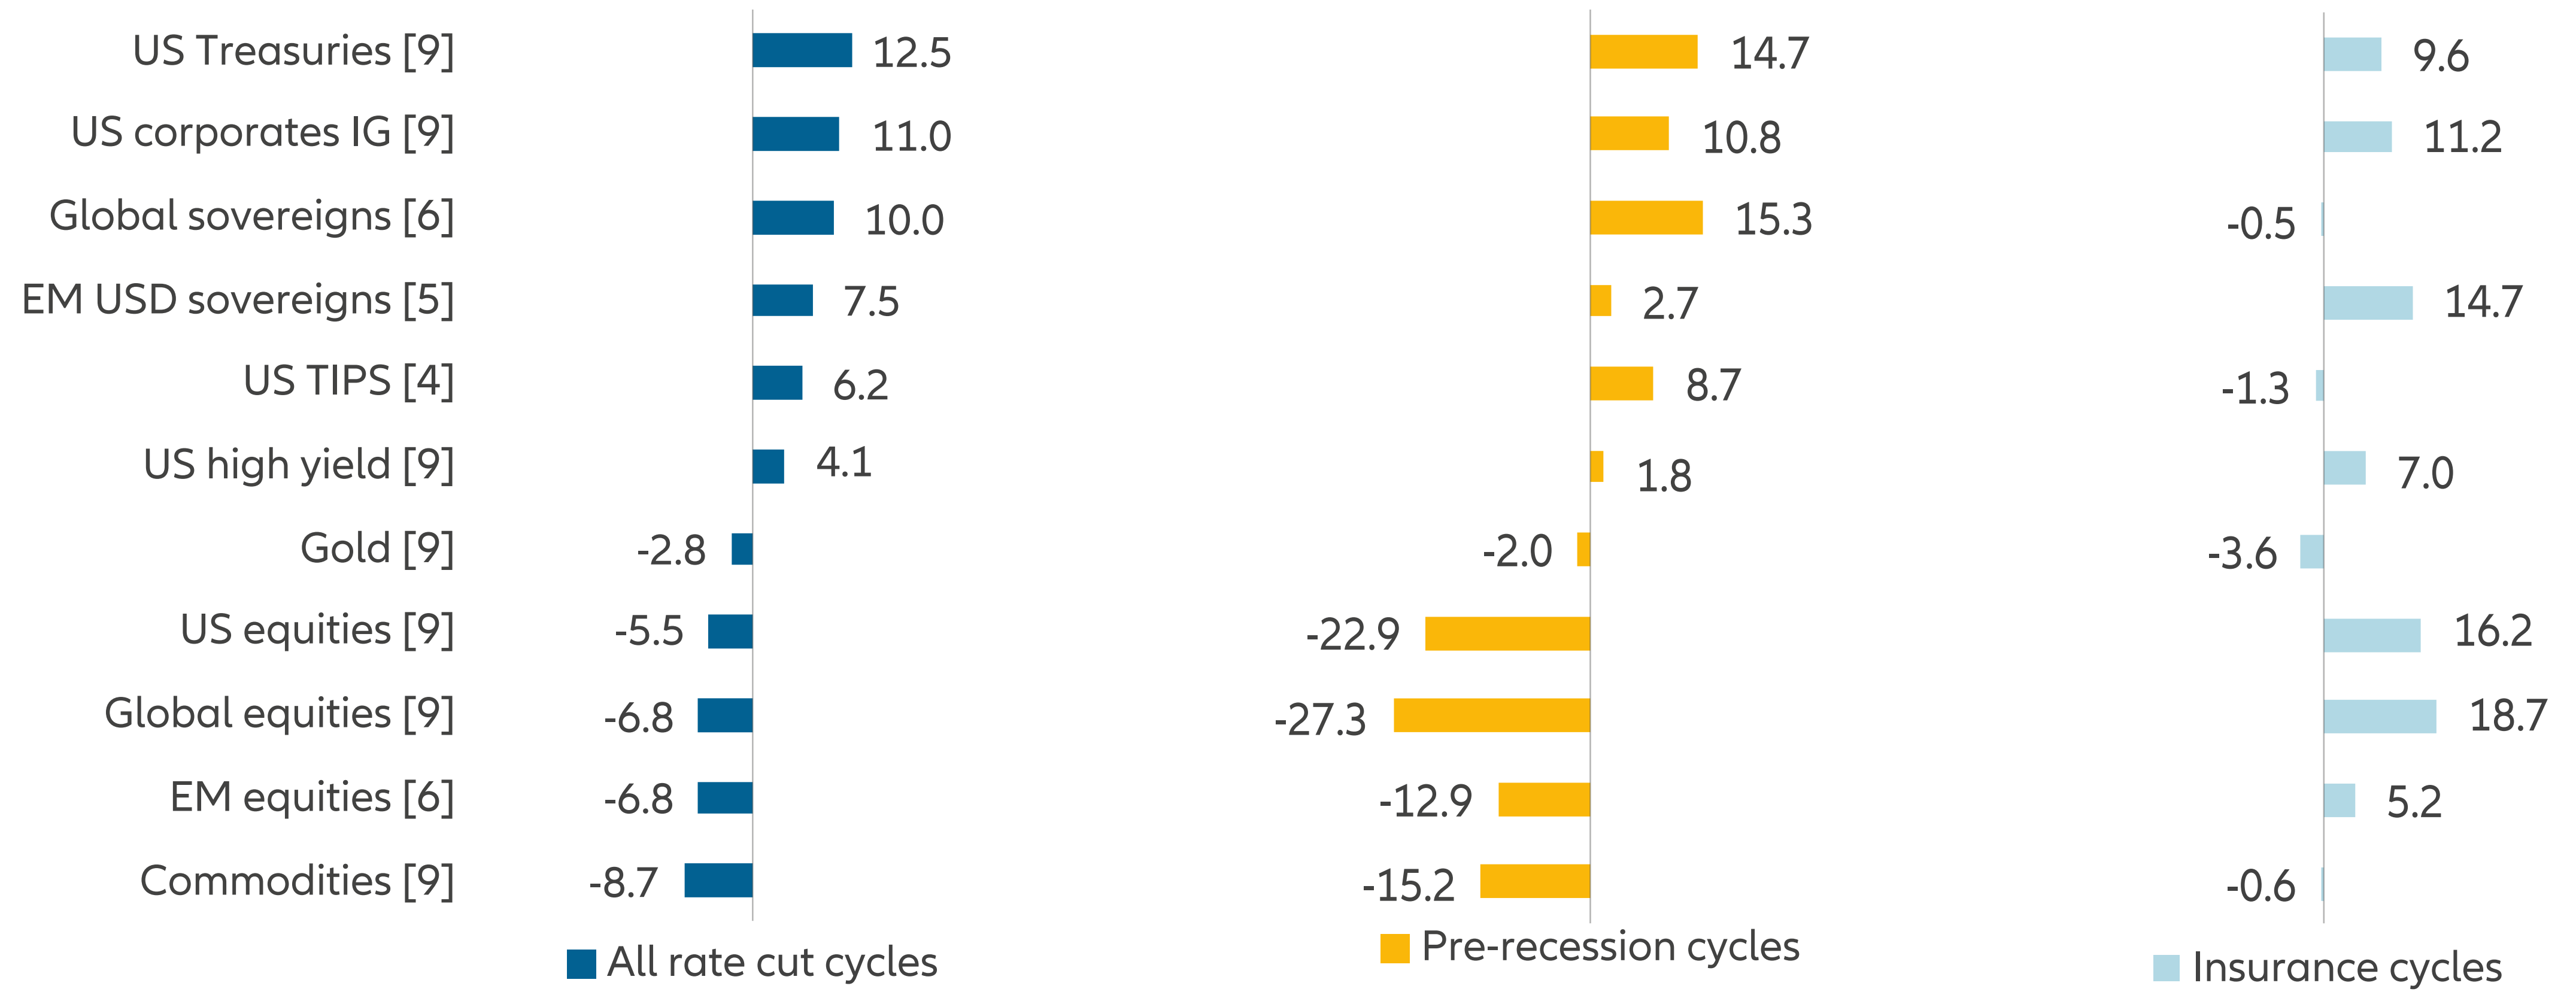 Exhibit 1: US Treasuries performed best of any asset class during cutting cycles